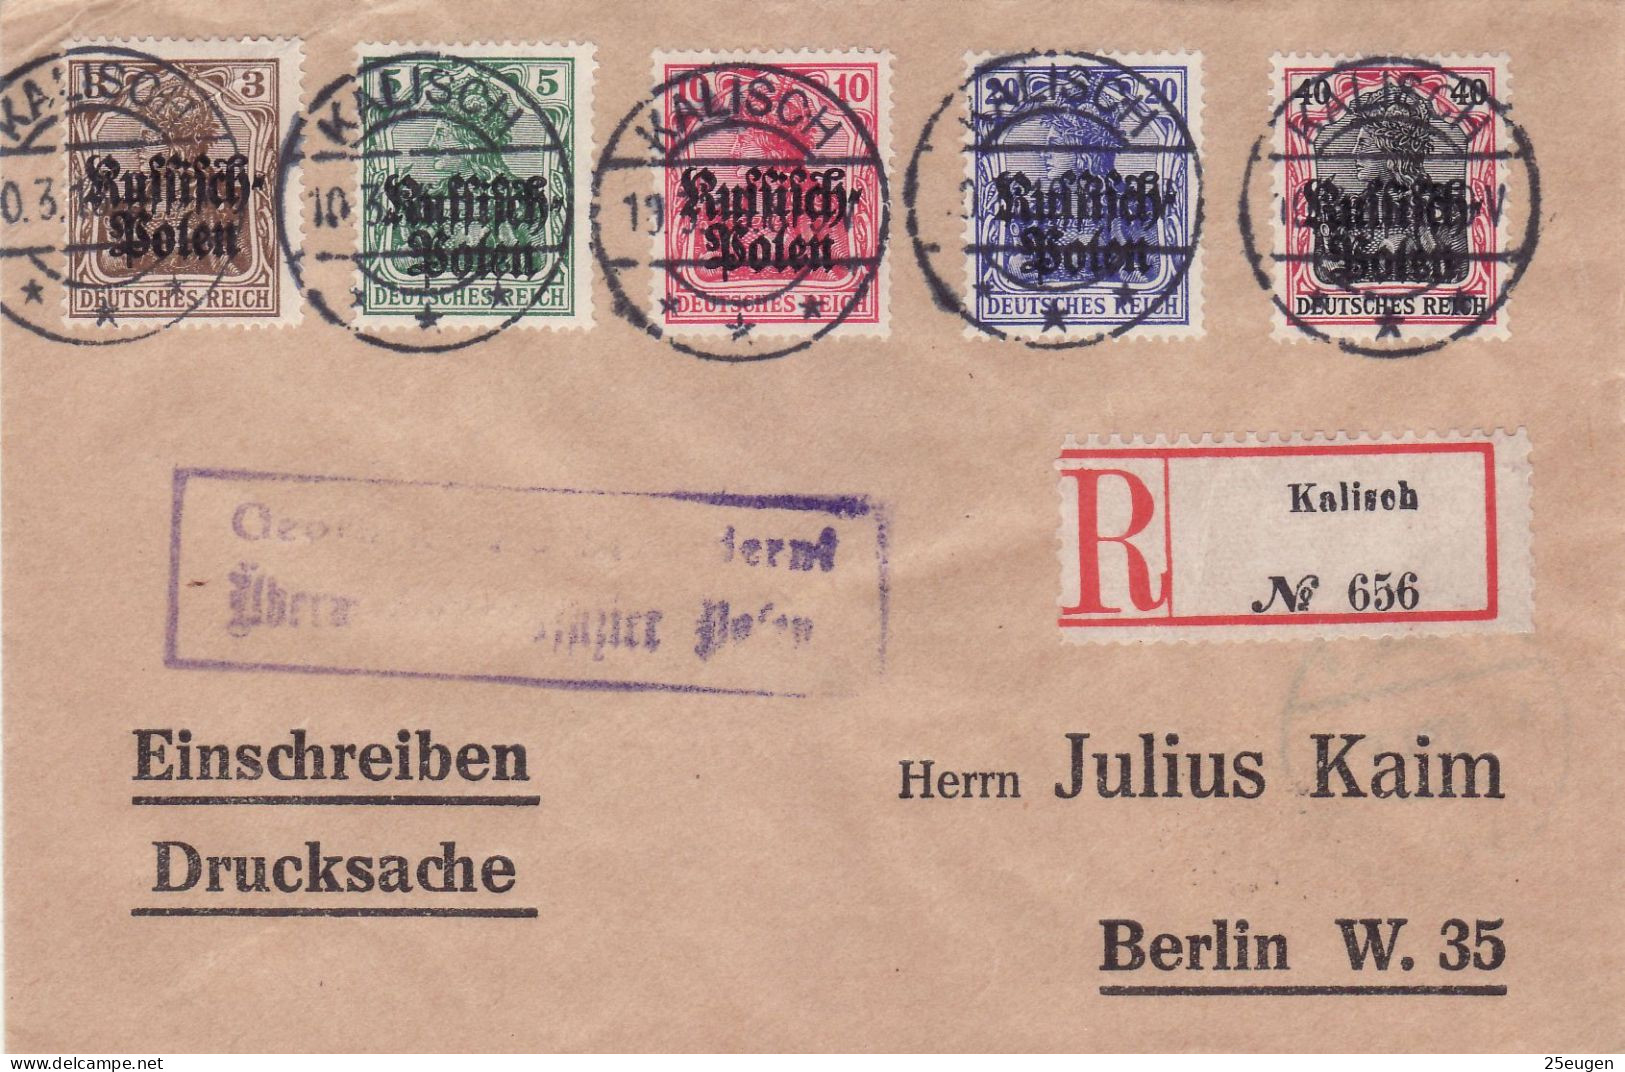 GERMAN OCCUPATION 1916 MICHEL No: 1 -  5  On R - Letter Sent From KALISZ To BERLIN - Lettres & Documents